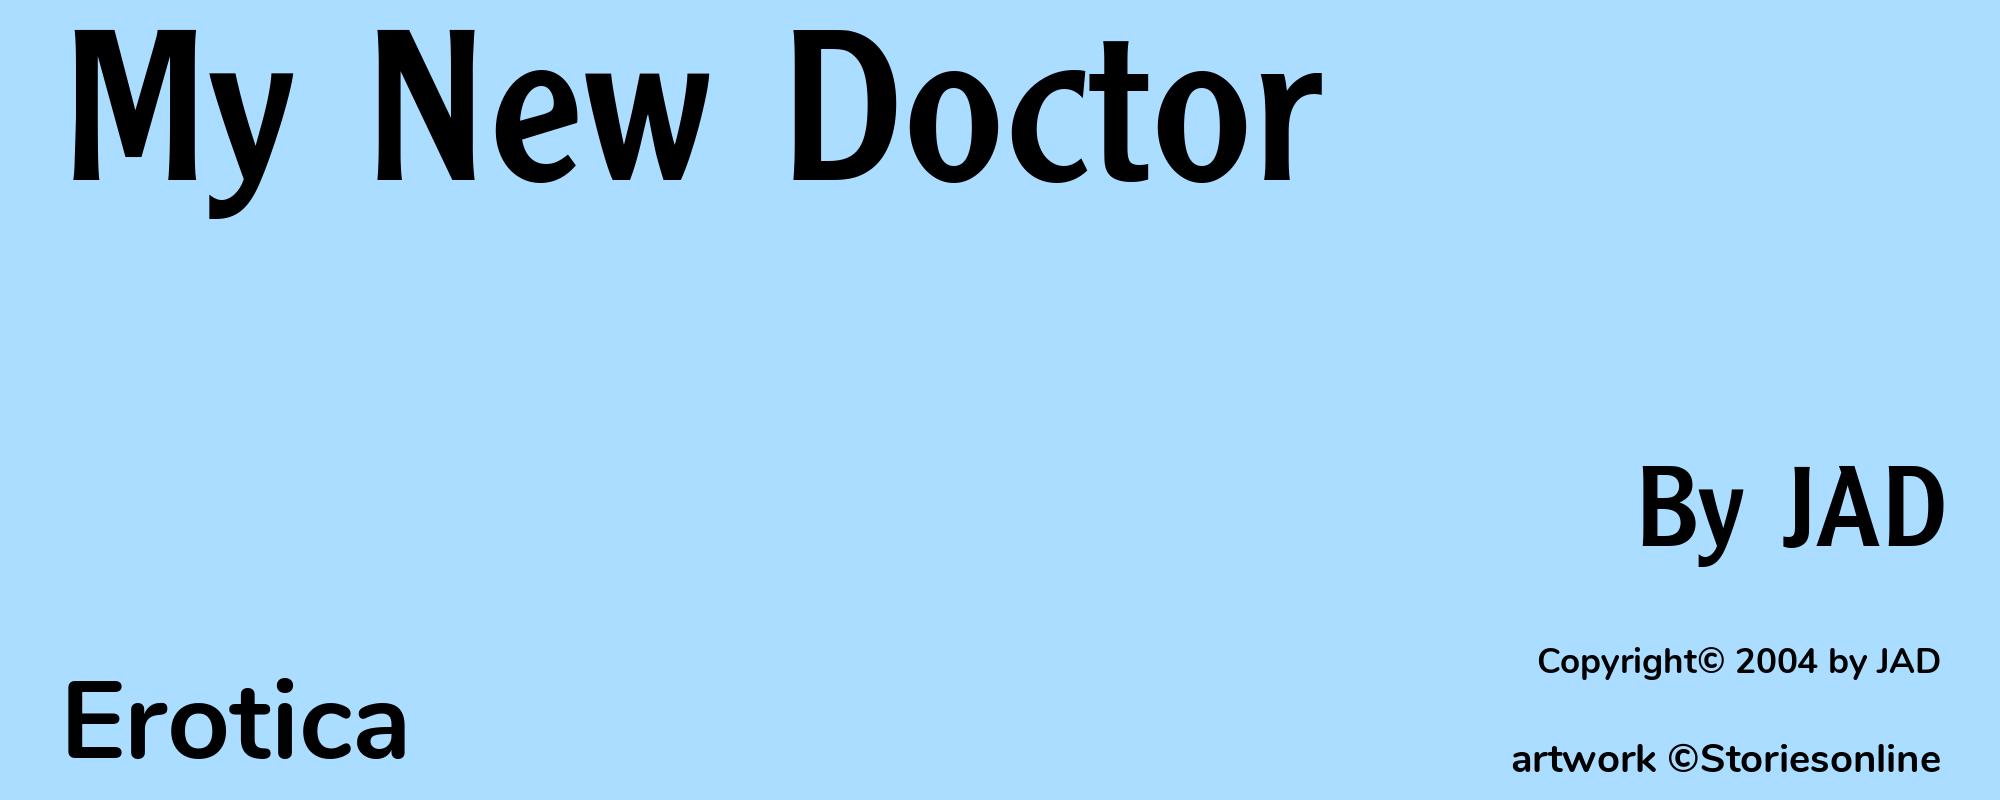 My New Doctor - Cover